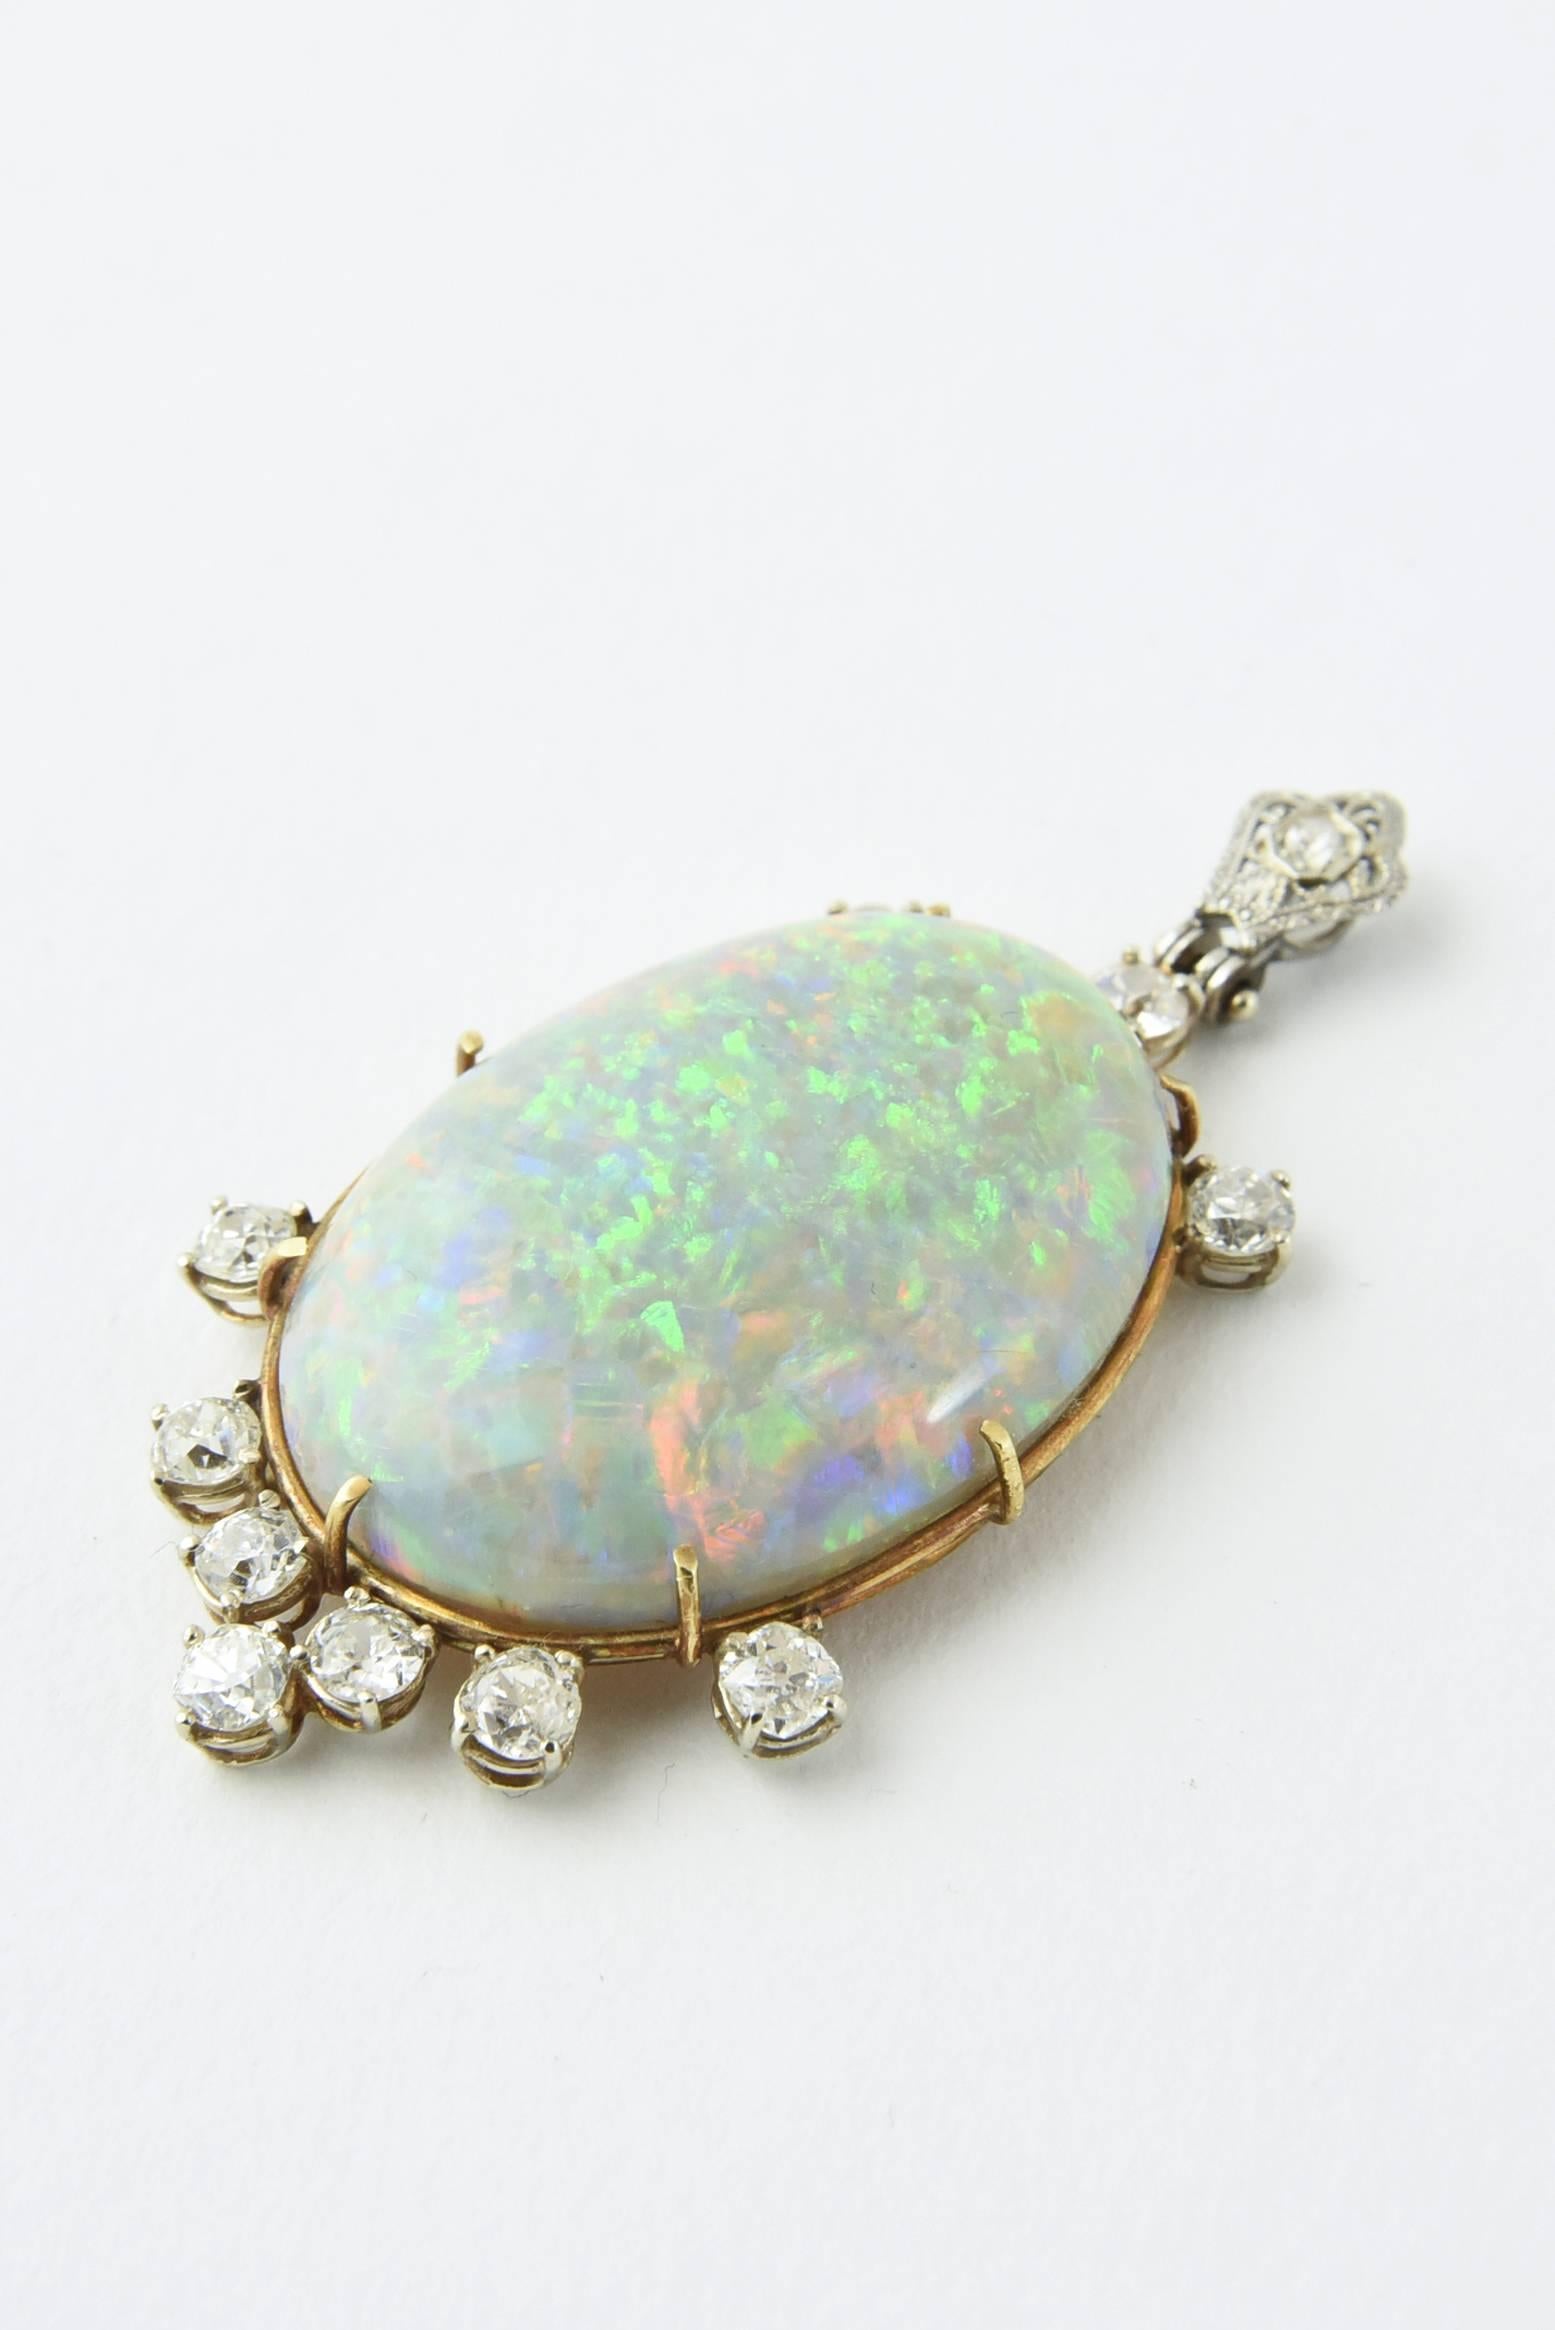 The intense color play shown by this Australian Gray Opal is incredible.  The large oval opal is approximately 18 carats with 2.25 carats approximate total weight in old mine cut diamond accents.  

Mounted in a 14k gold bezel.
The opal is